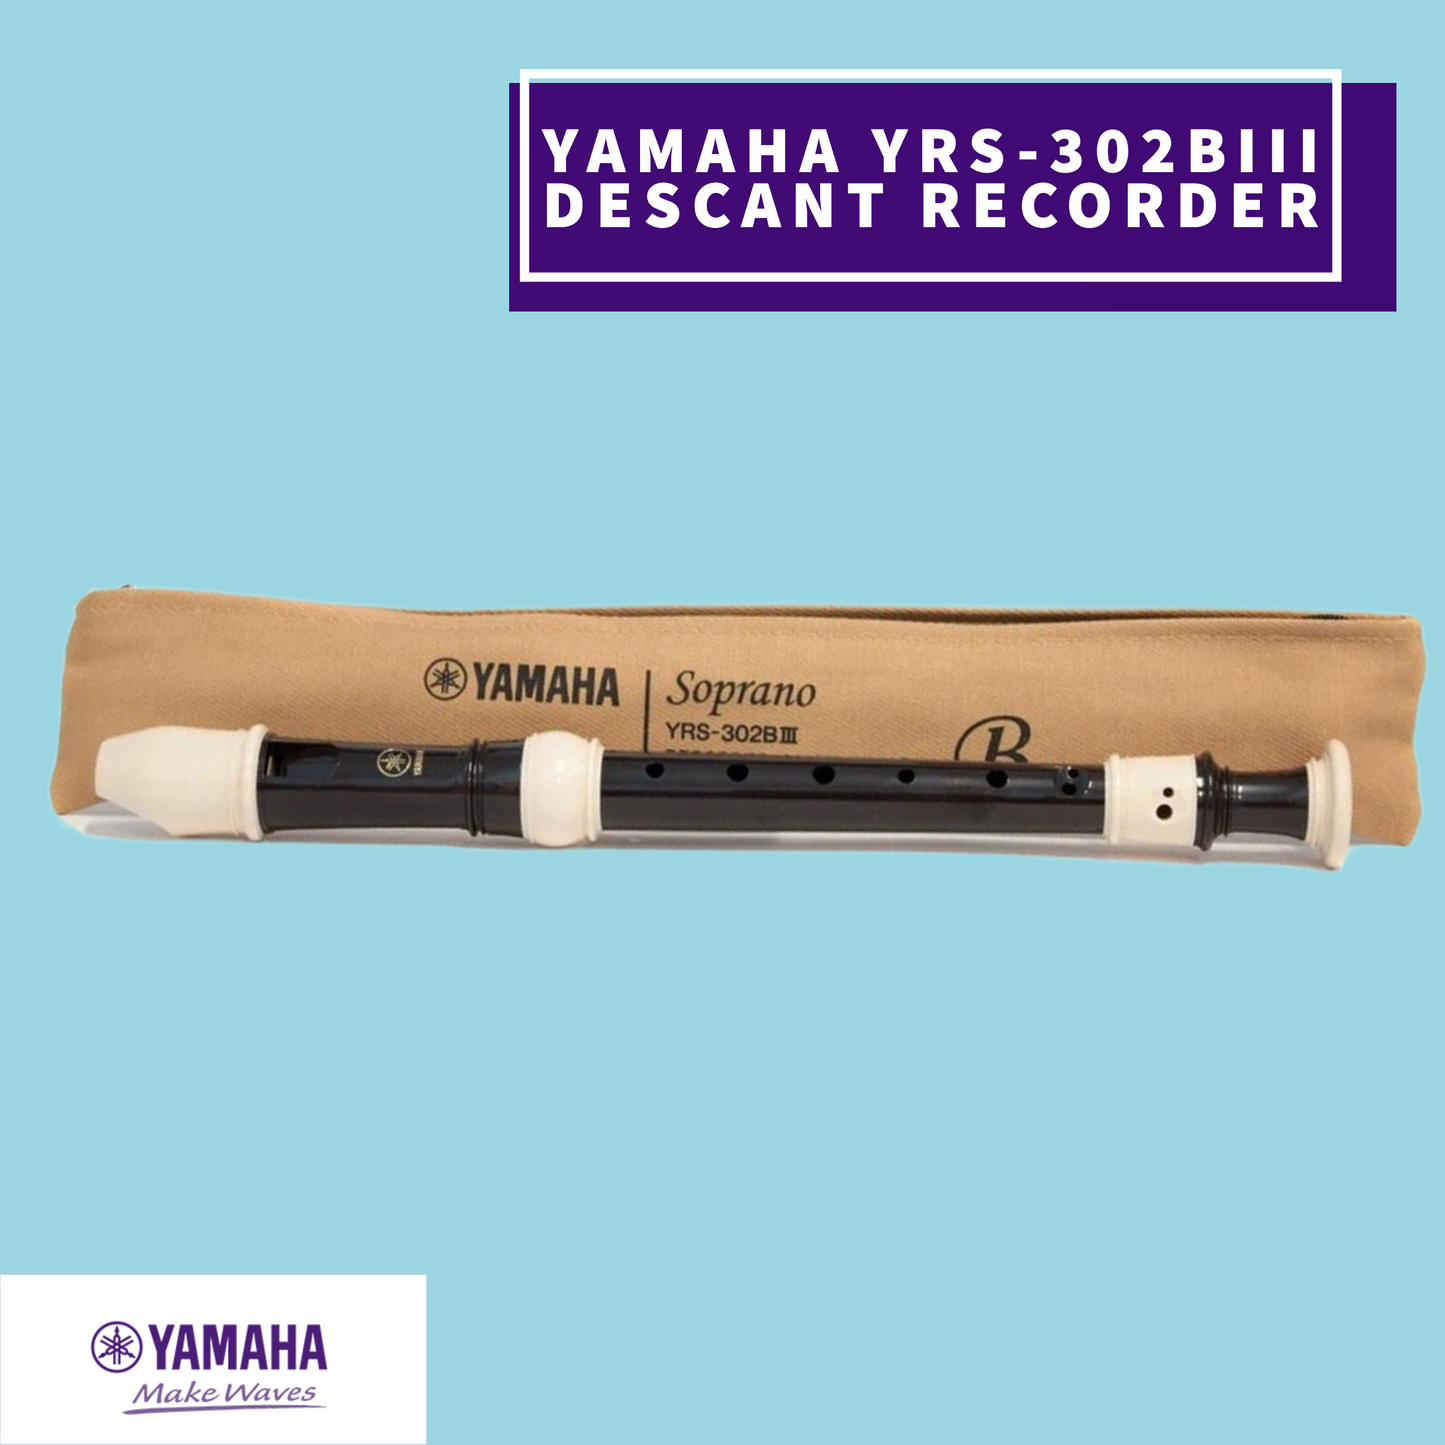 Yamaha Yrs-302Biii Descant 3 Piece Abs Resin Recorder (Key Of C) Musical Instruments & Accessories